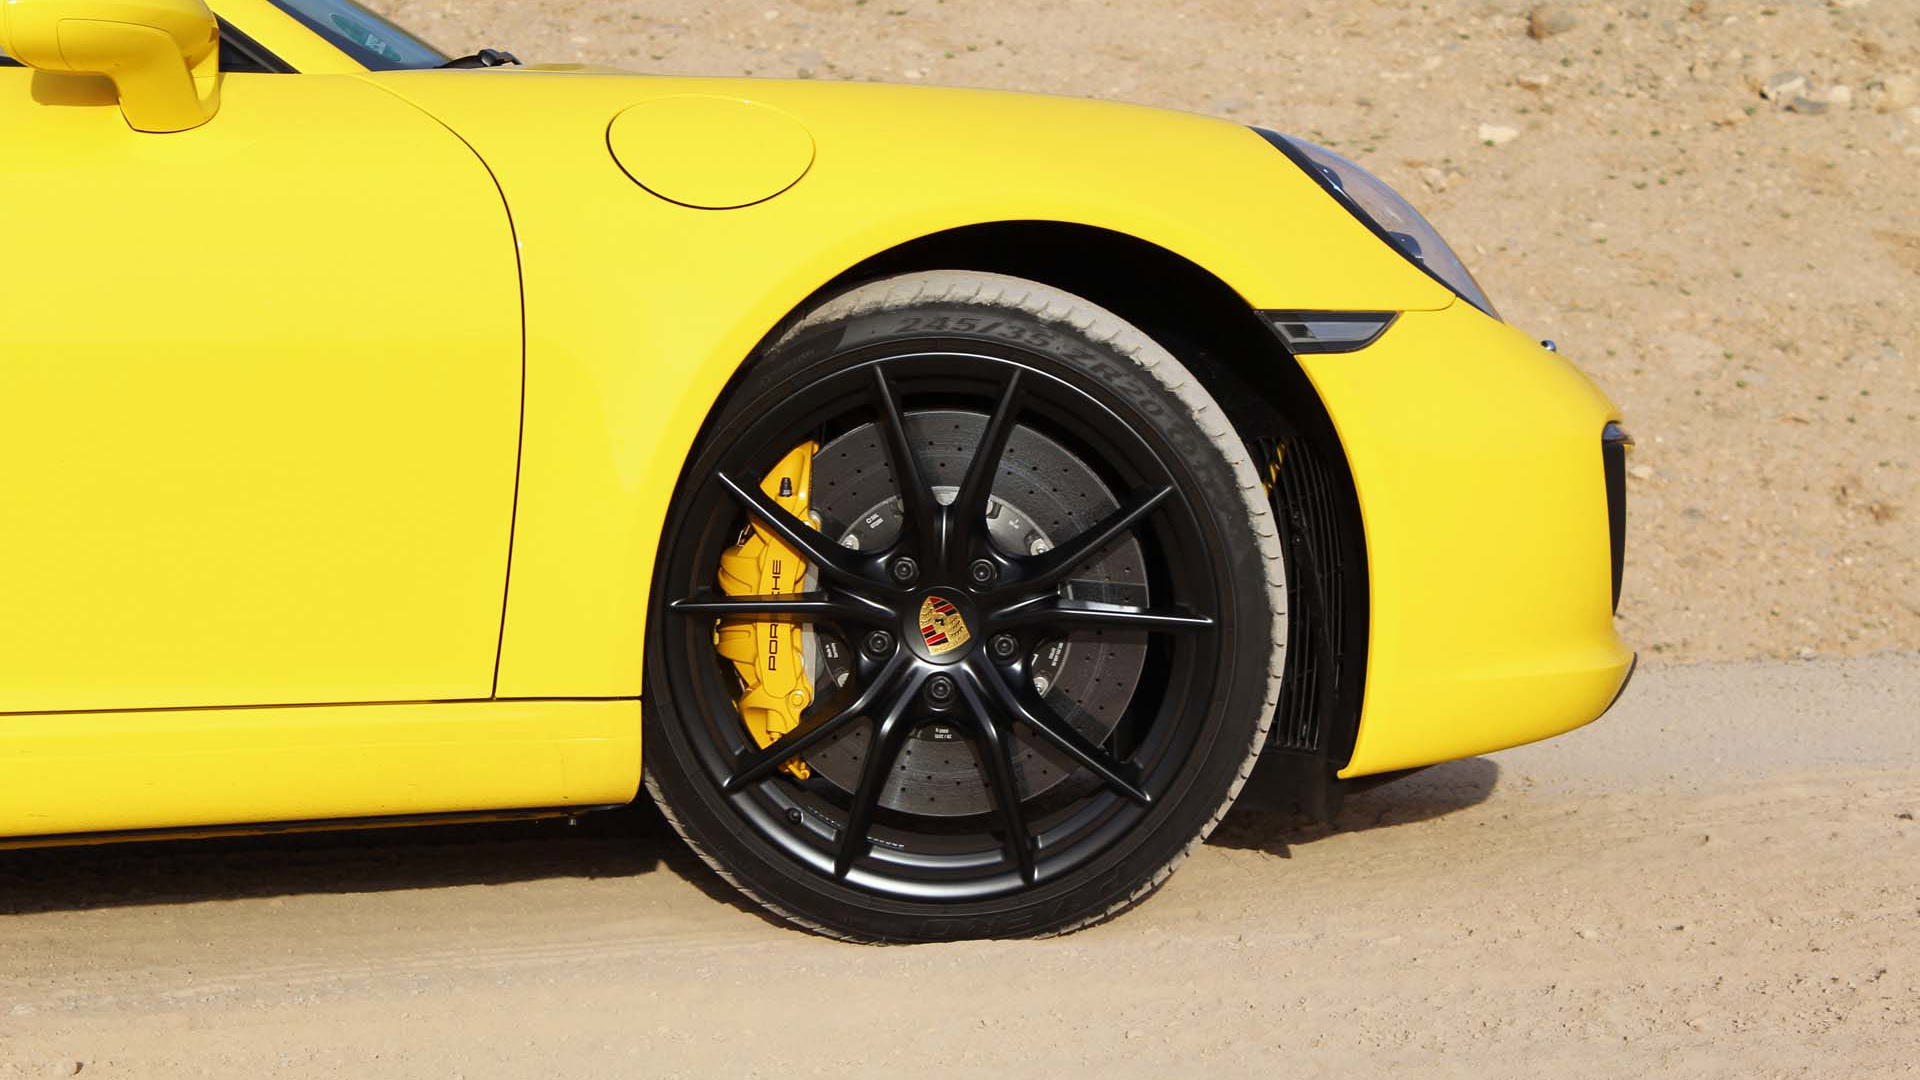 You’ll be paying $9730 for these ceramic brakes.